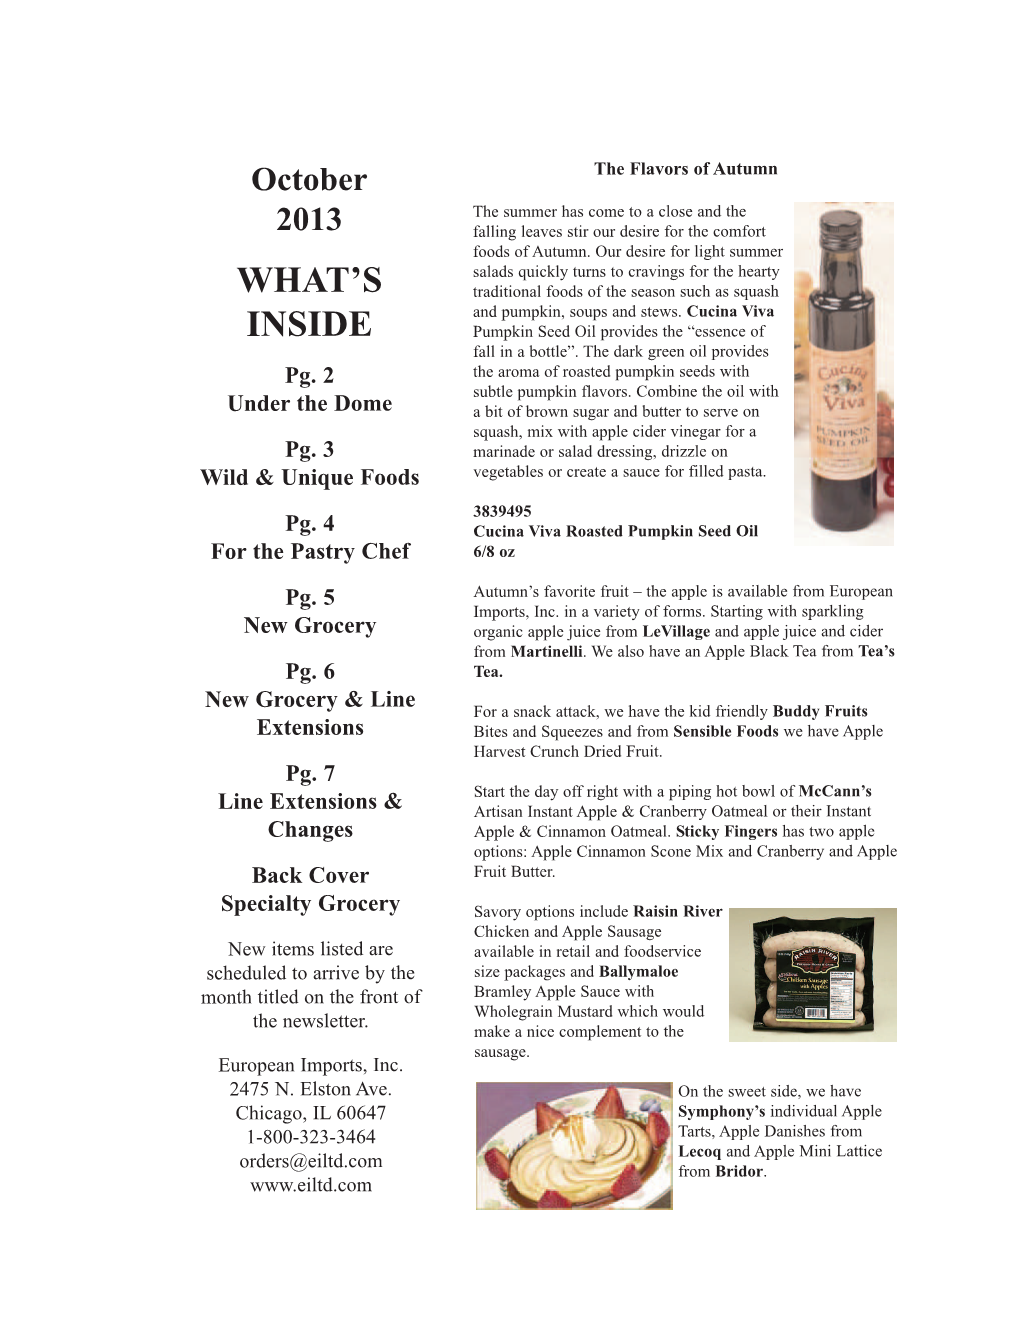 October 2013 Newsletter Wild & Unique Foods by Tim Doyle, Meat & Game Specialist Discover the Difference of Duck